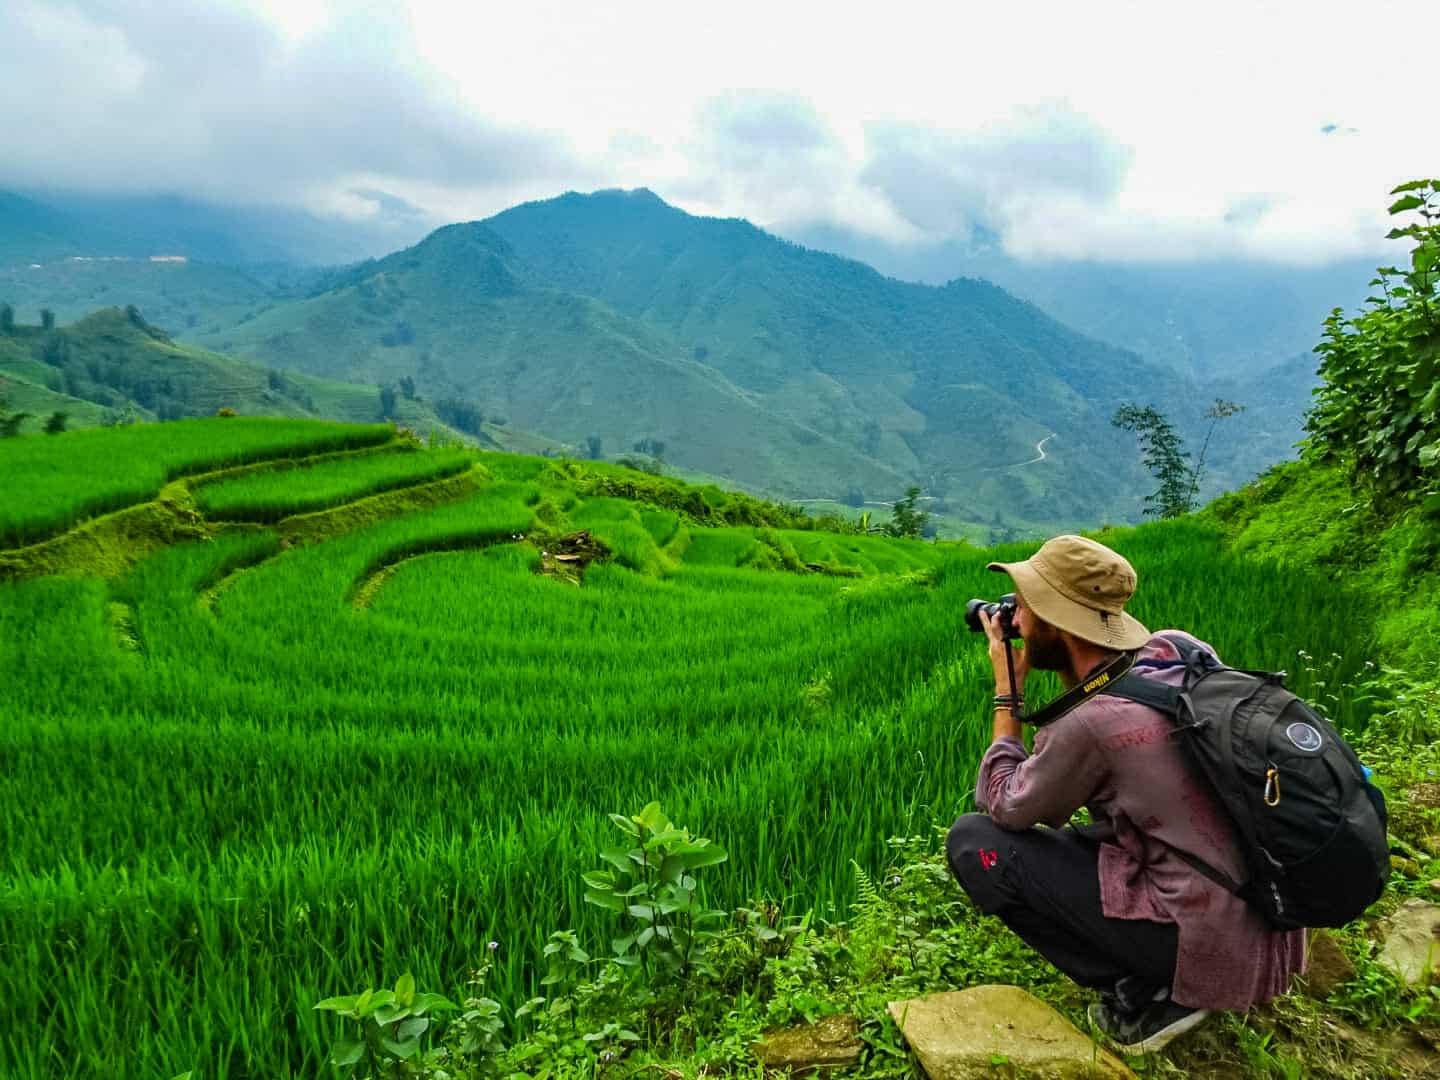 Explore the rolling green hills of SaPa in nothern Vietnam